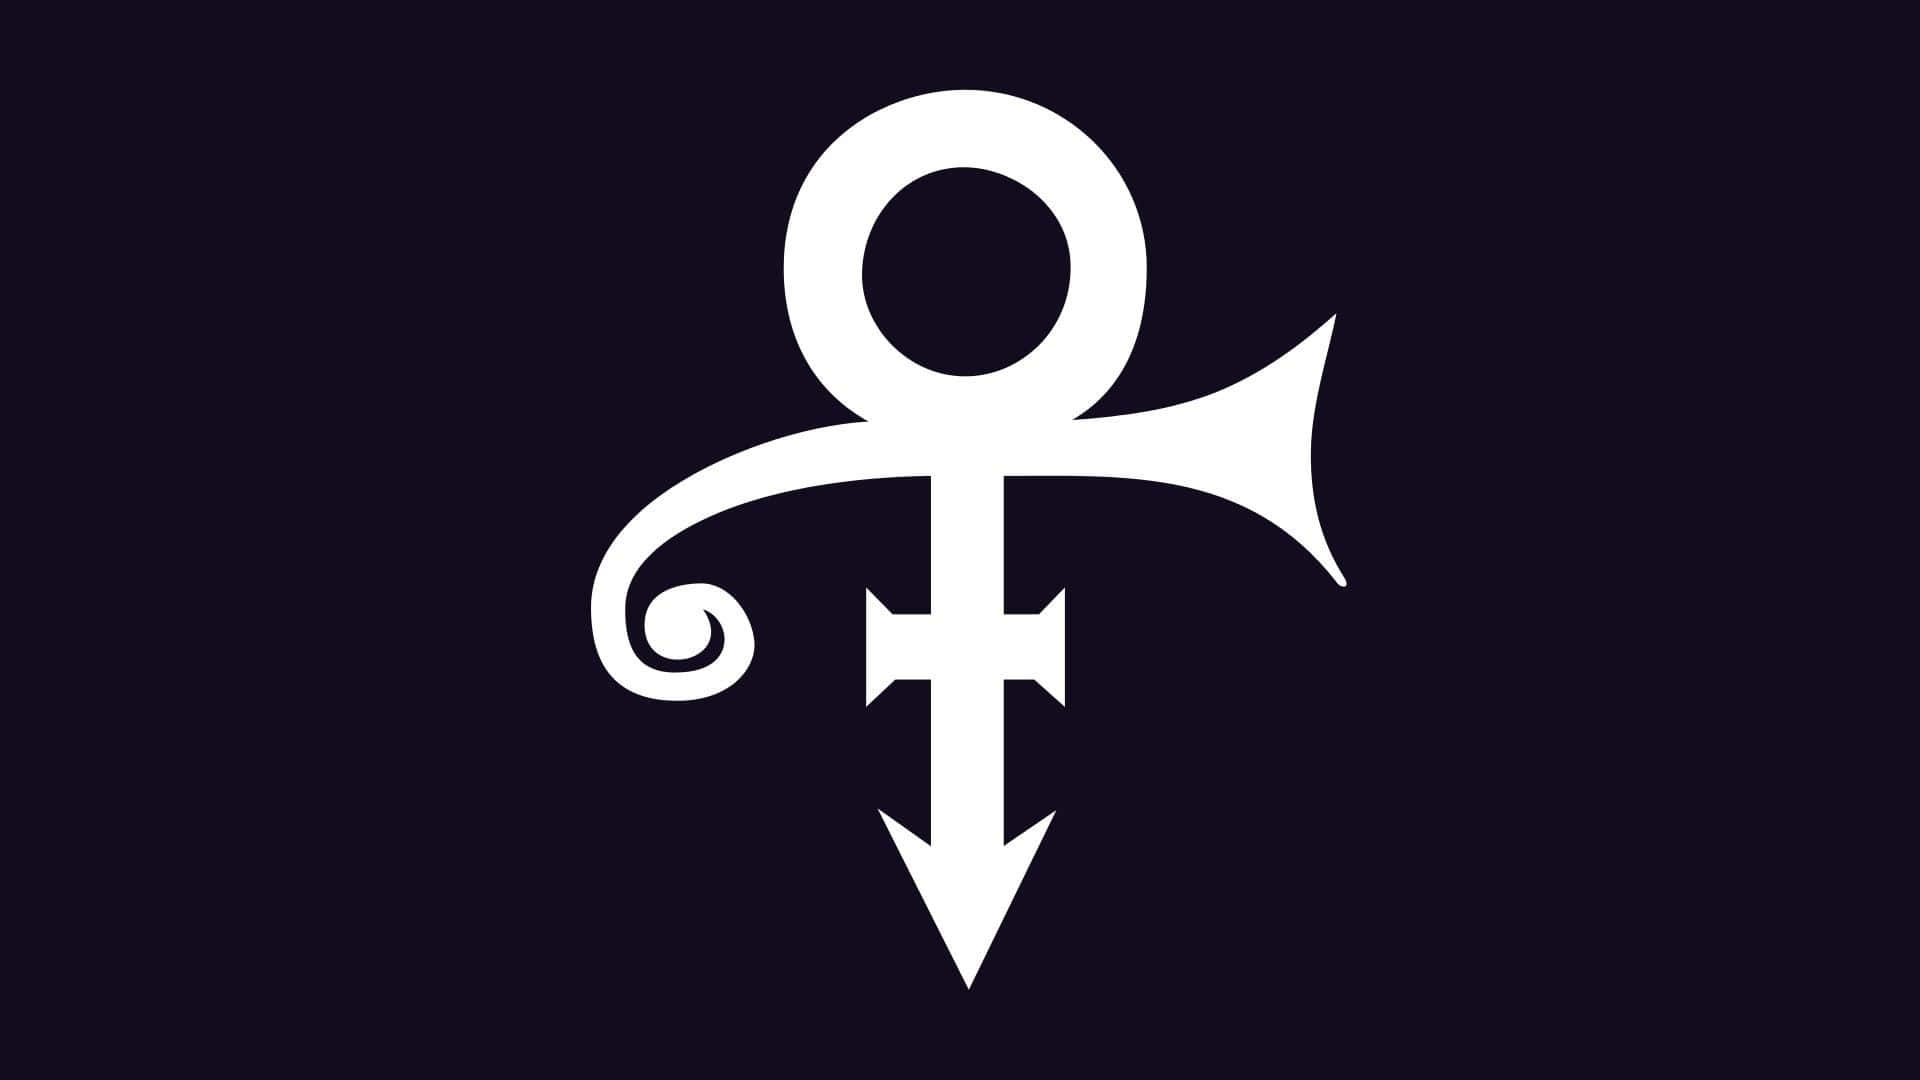 The Iconic Prince Symbol Wallpaper